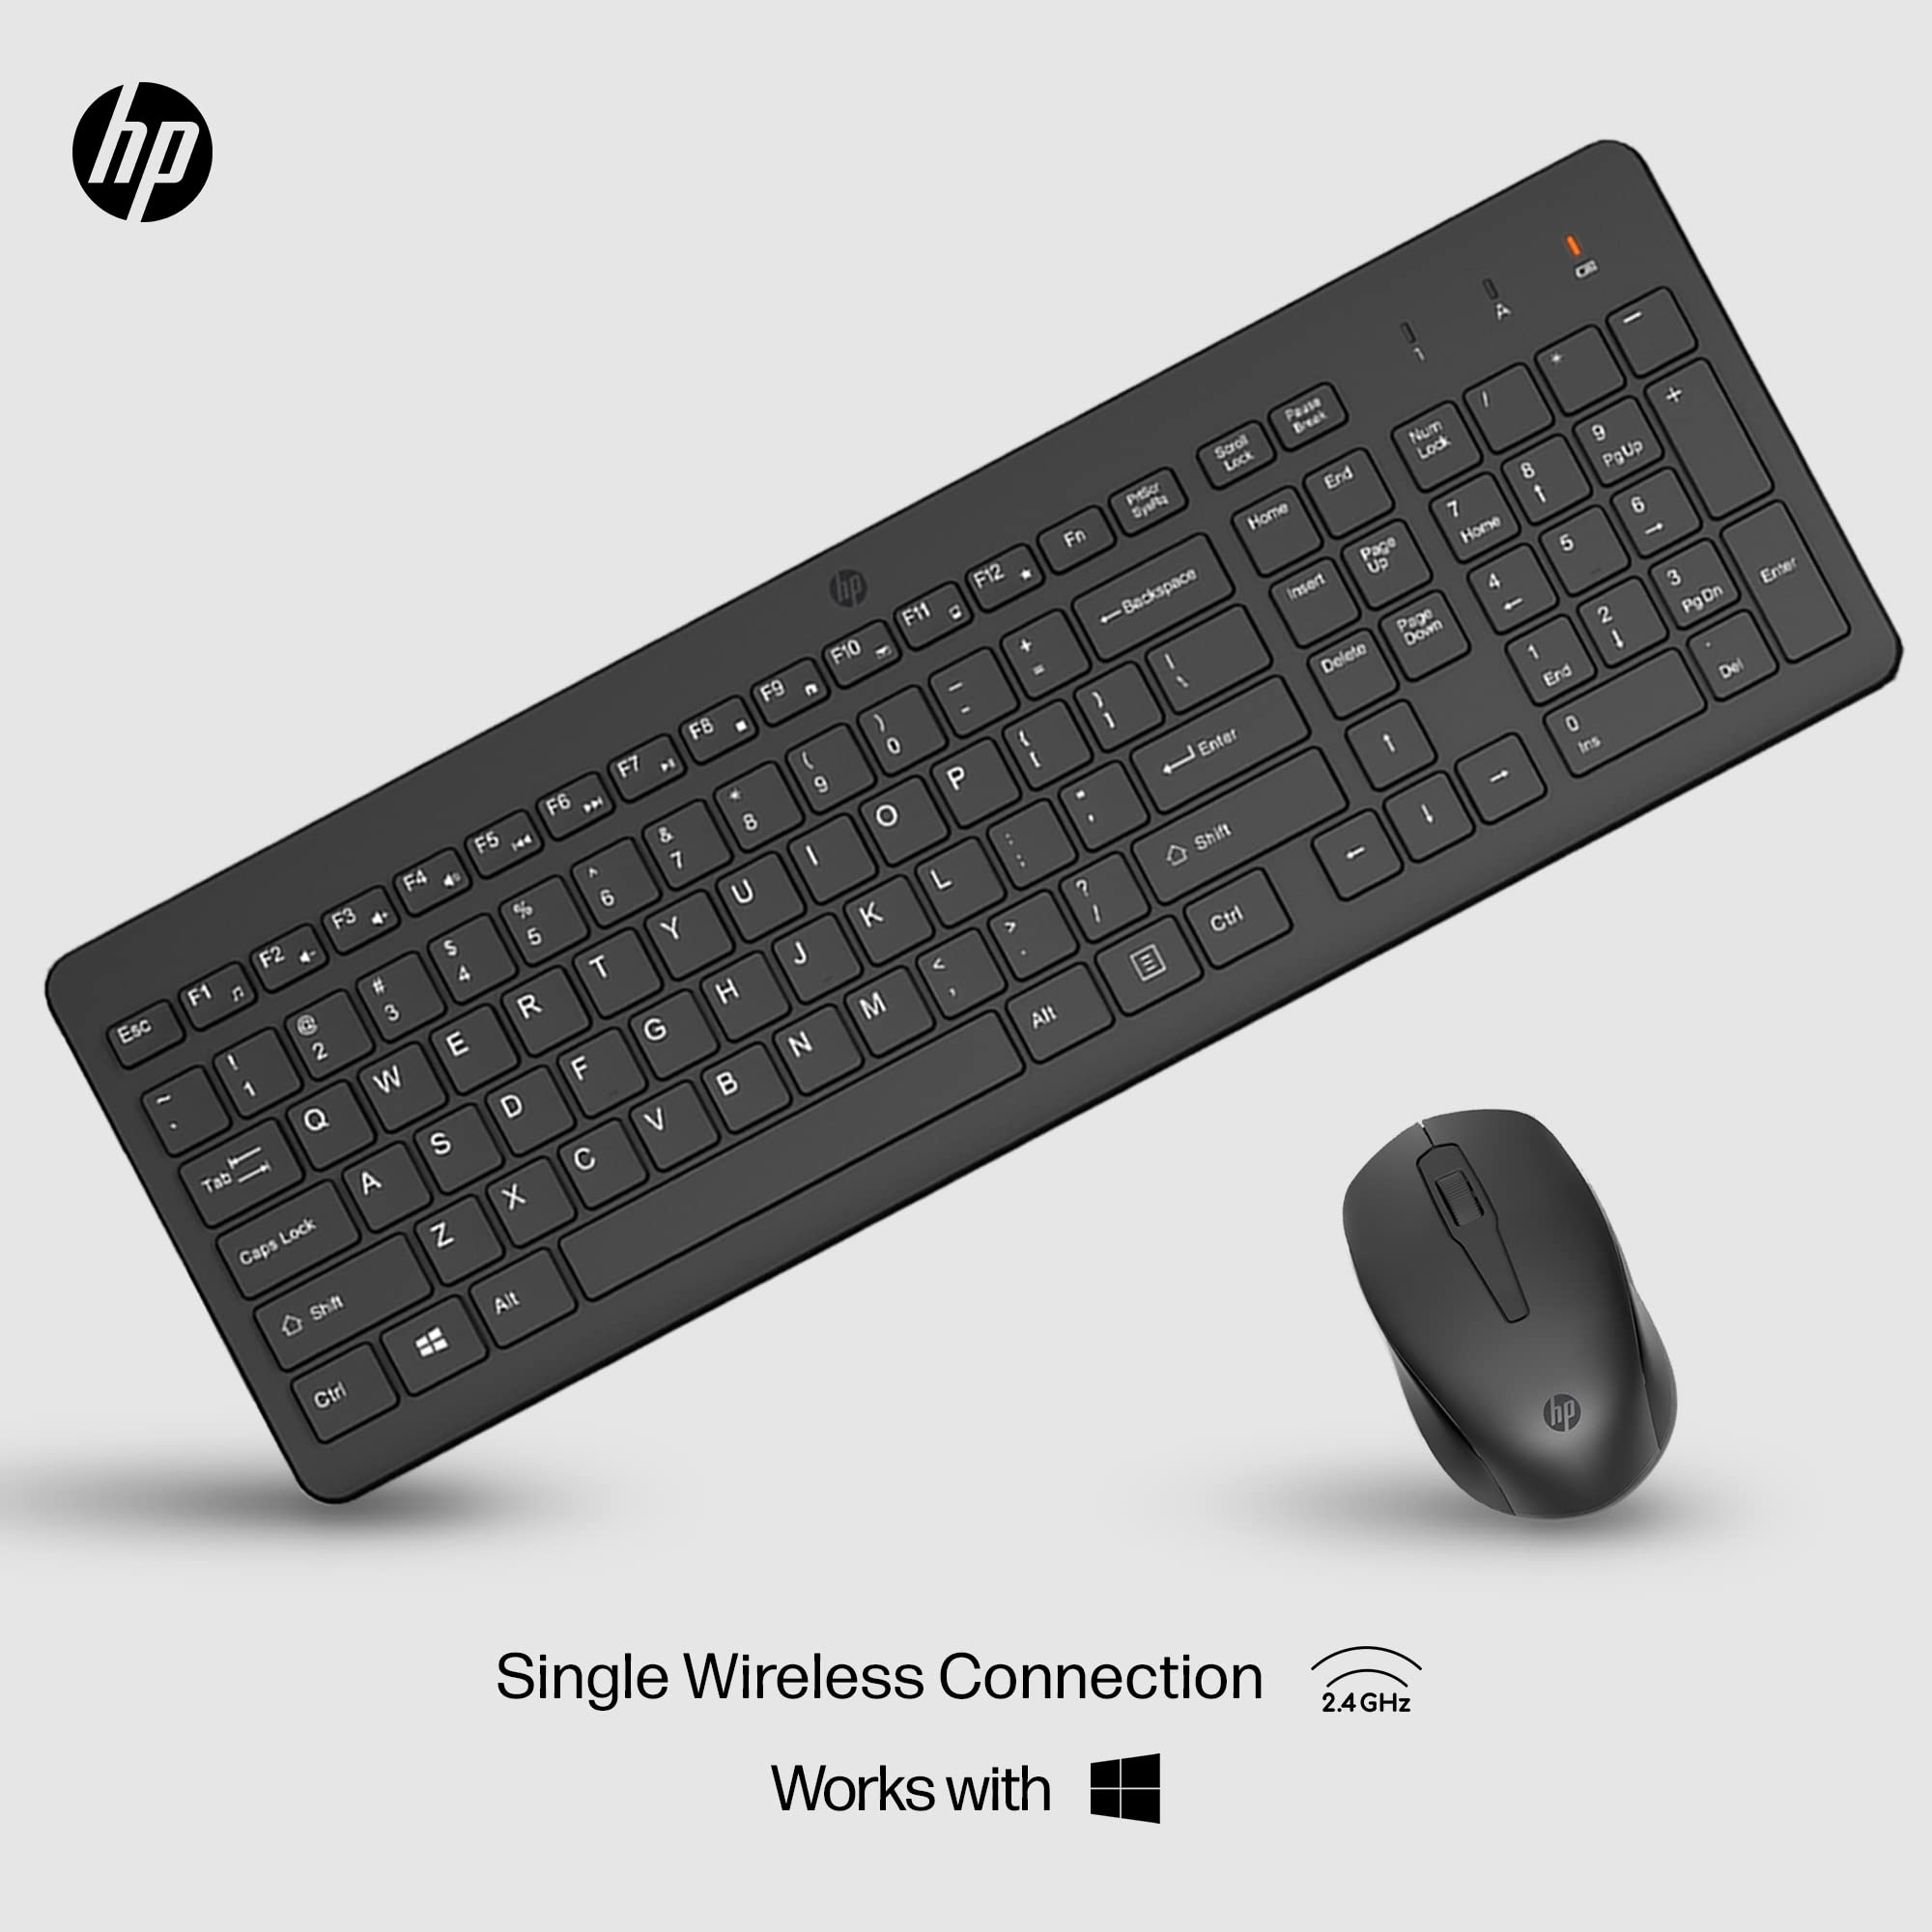 HP 330 Wireless Keyboard and Mouse Combo - 2.4 Ghz Wireless USB Receiver - Chiclet Keys, 12 Keyboard Shortcuts - 1600 DPI Multi-Surface Mouse - LED Num Lock, Caps Lock, Scroll Lock (2V9E6AA)